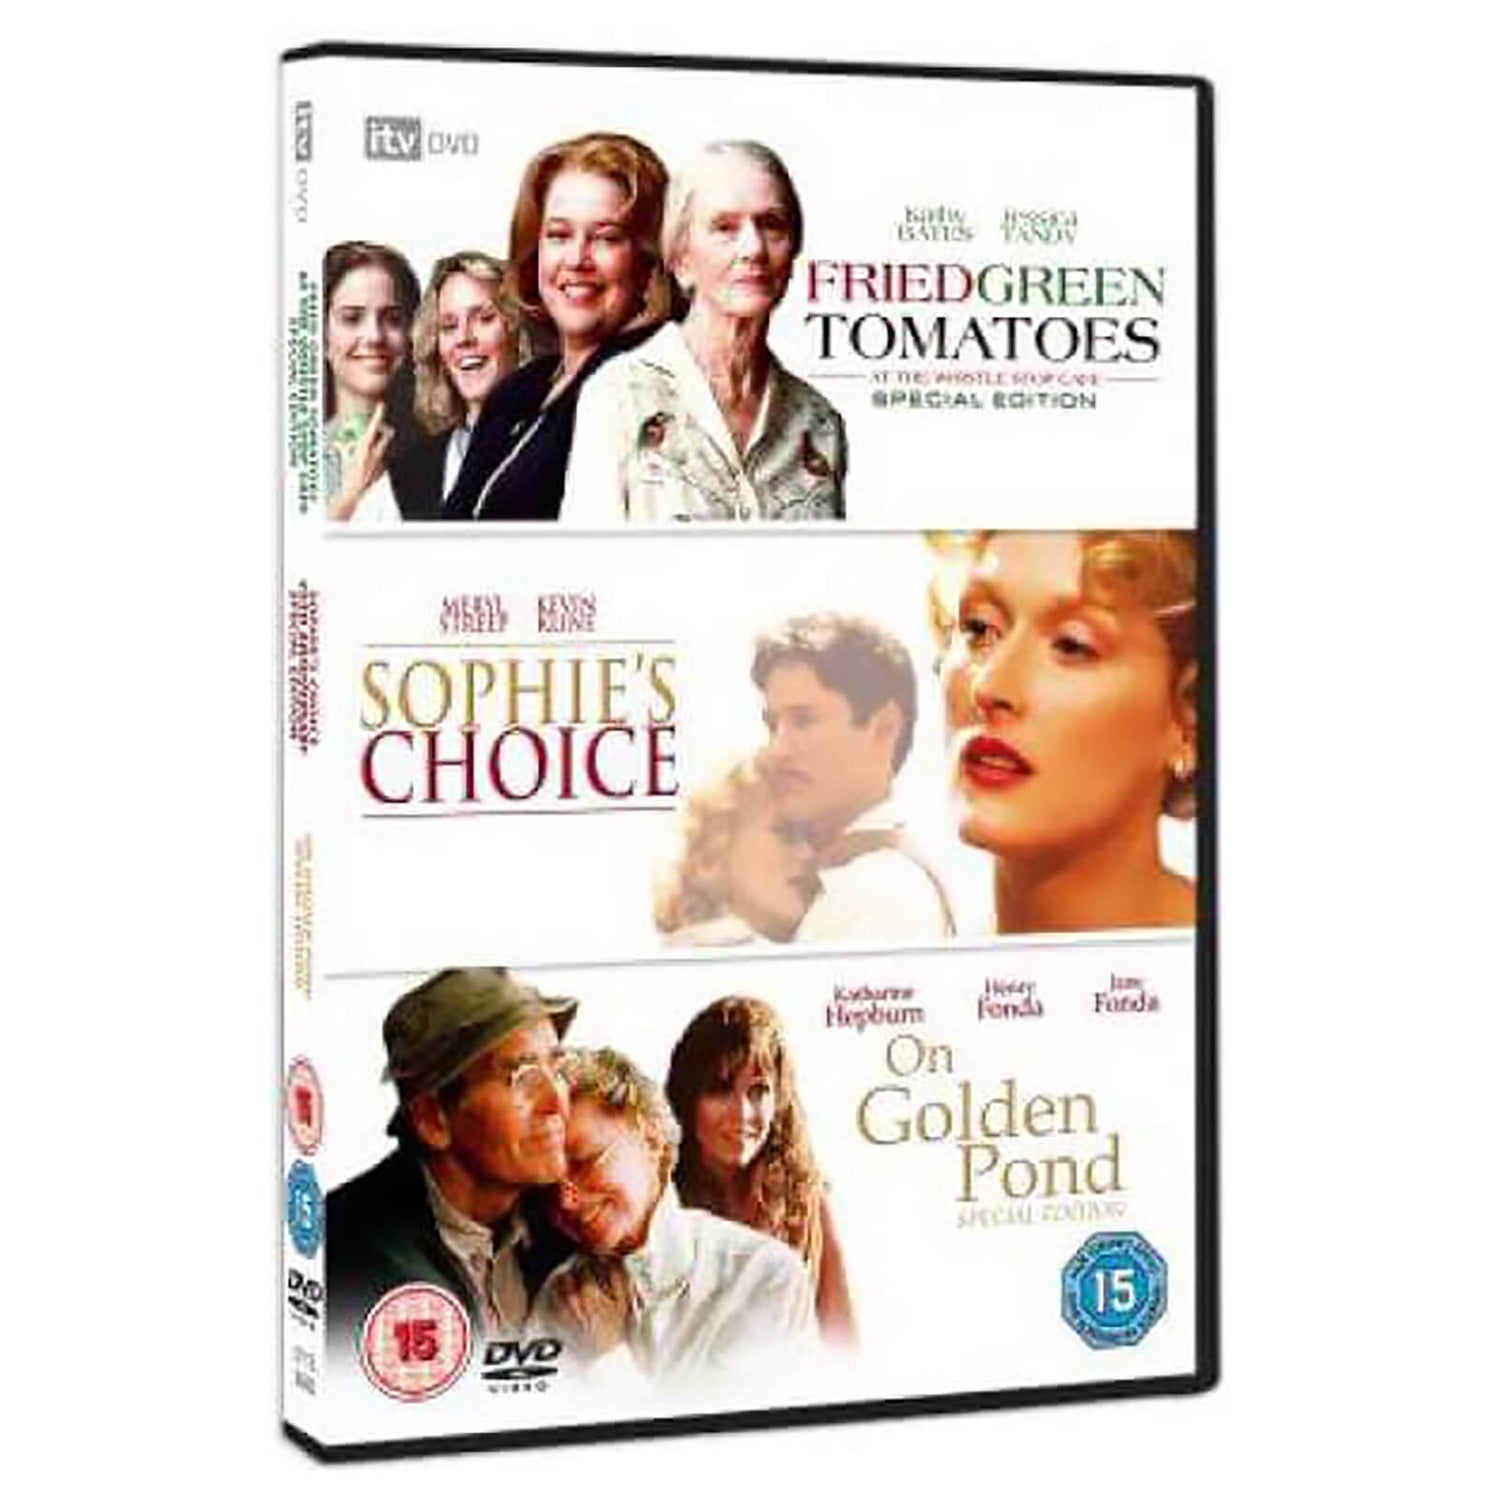 On Golden Pond/Fried Green Tomatoes/Sophies Choice